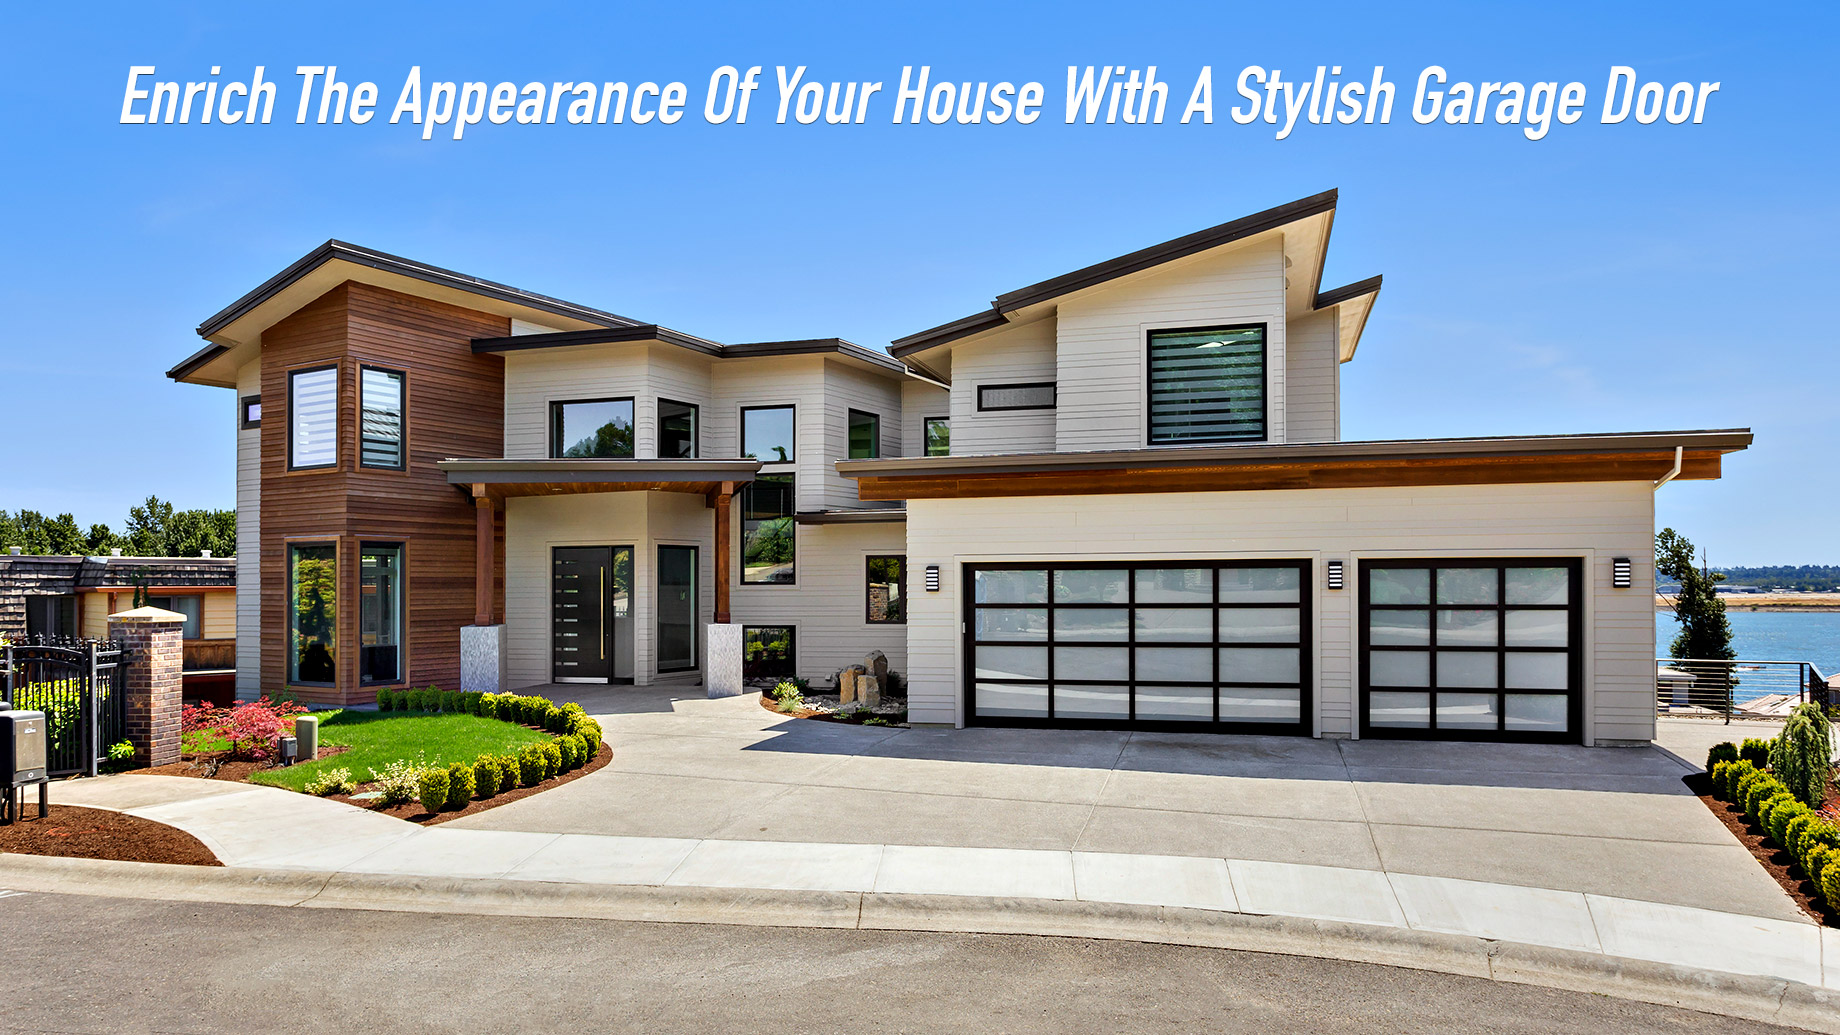 Enrich The Appearance Of Your House With A Stylish Garage Door